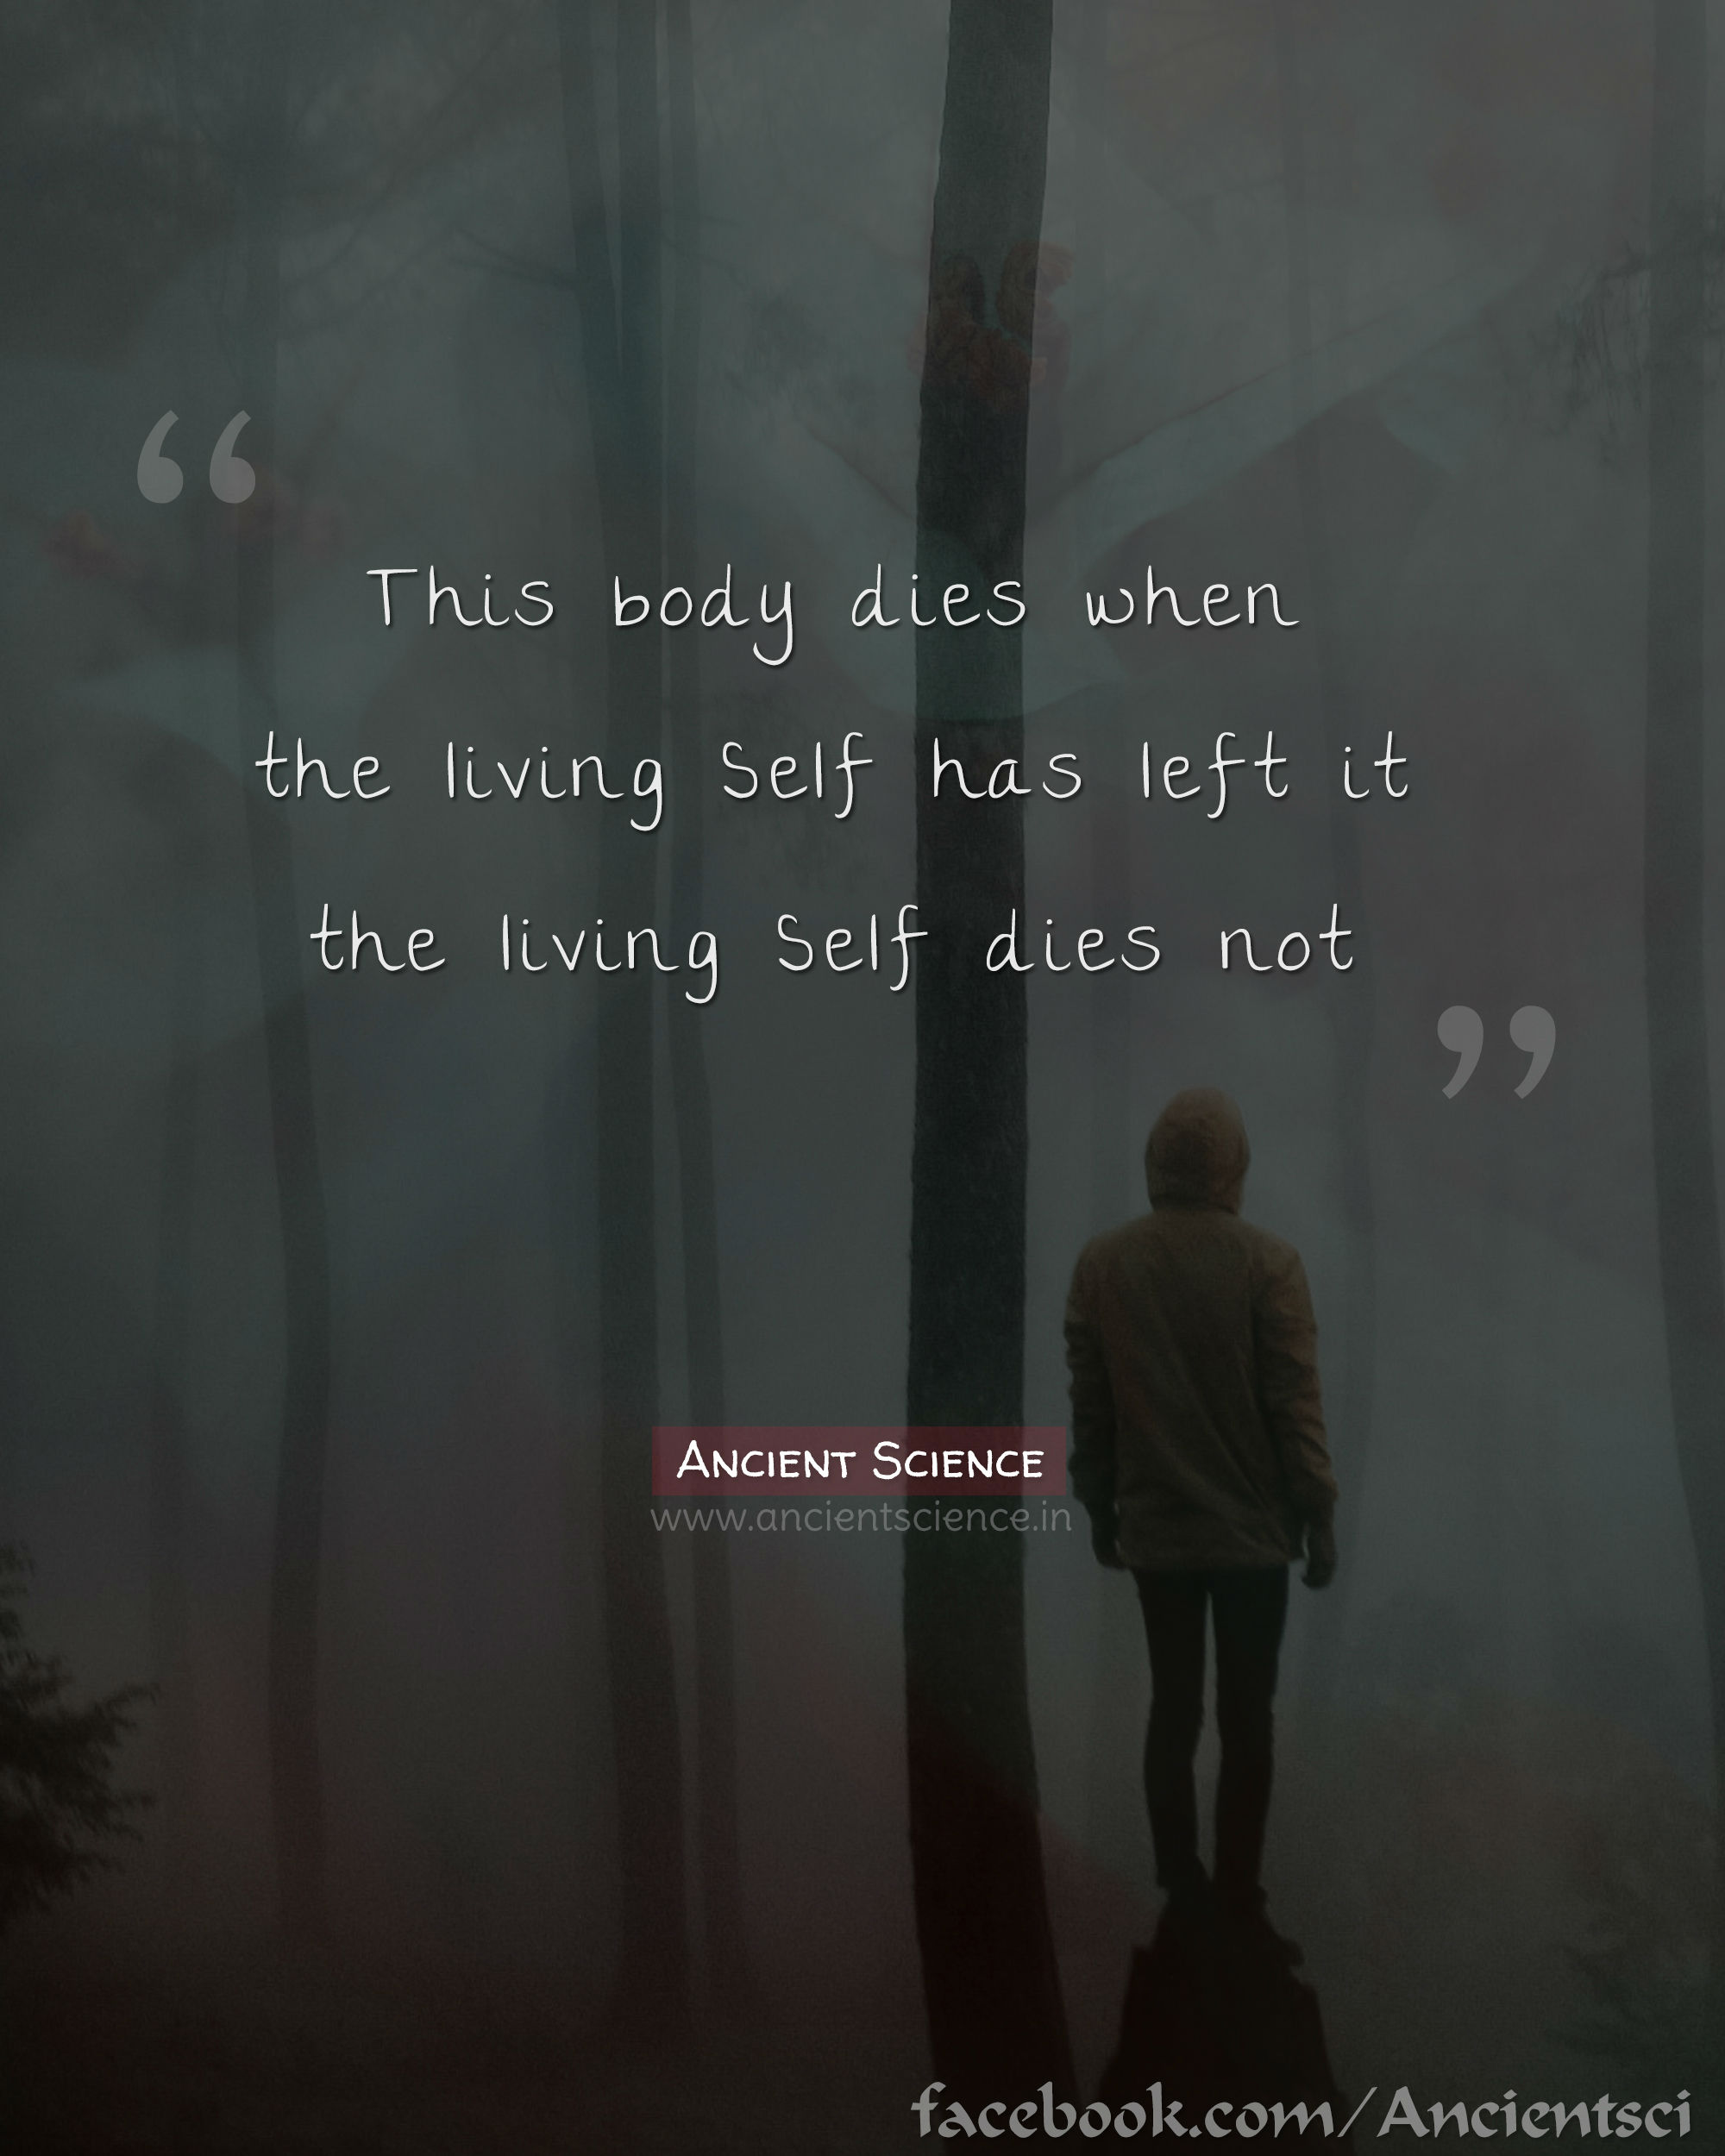 This body dies when the living Self has left it, the living Self dies not.